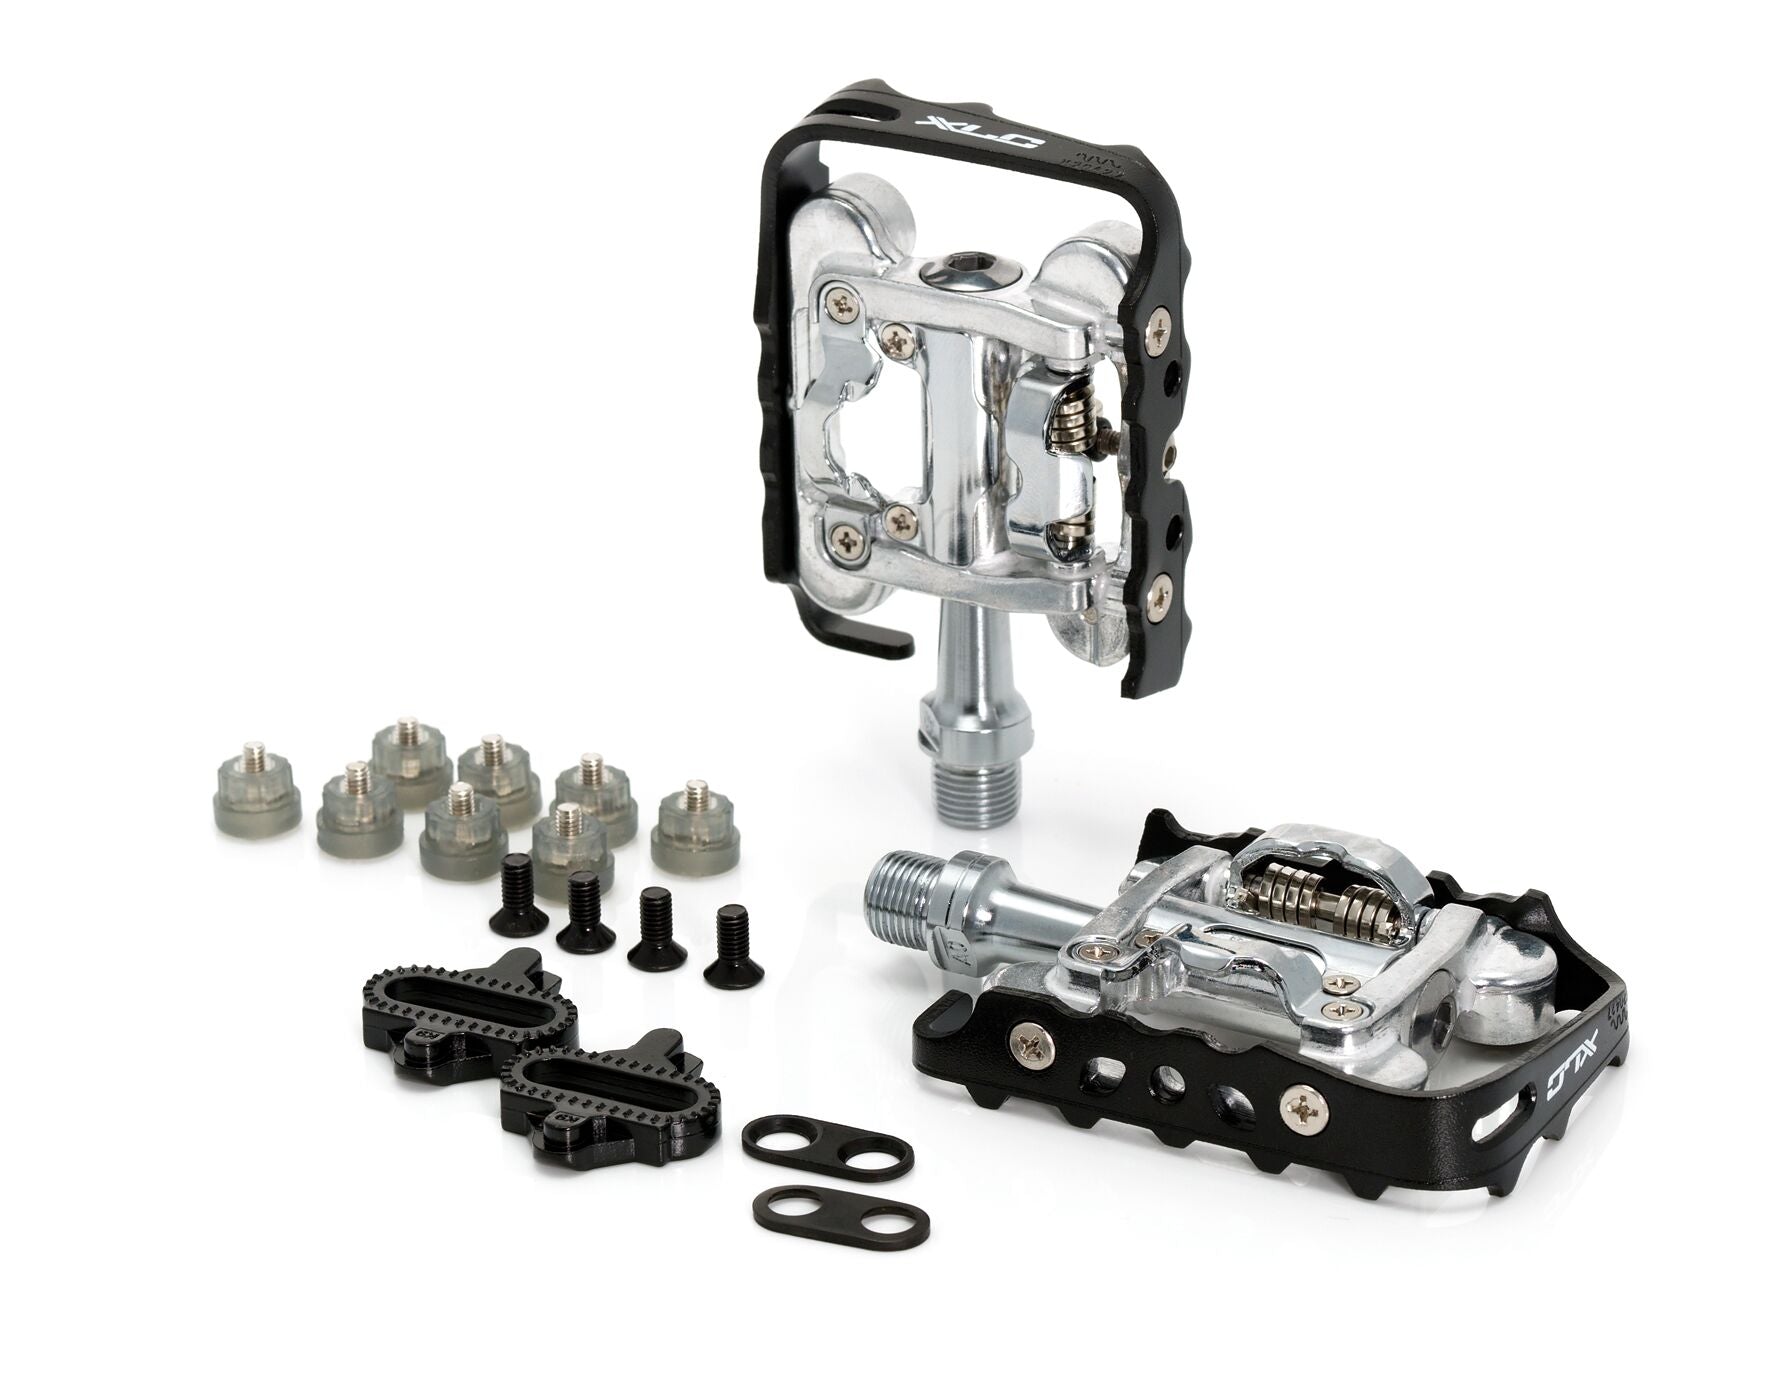 XLC PD-S02 Single Sided Shimano SPD Clipless Bike Pedals